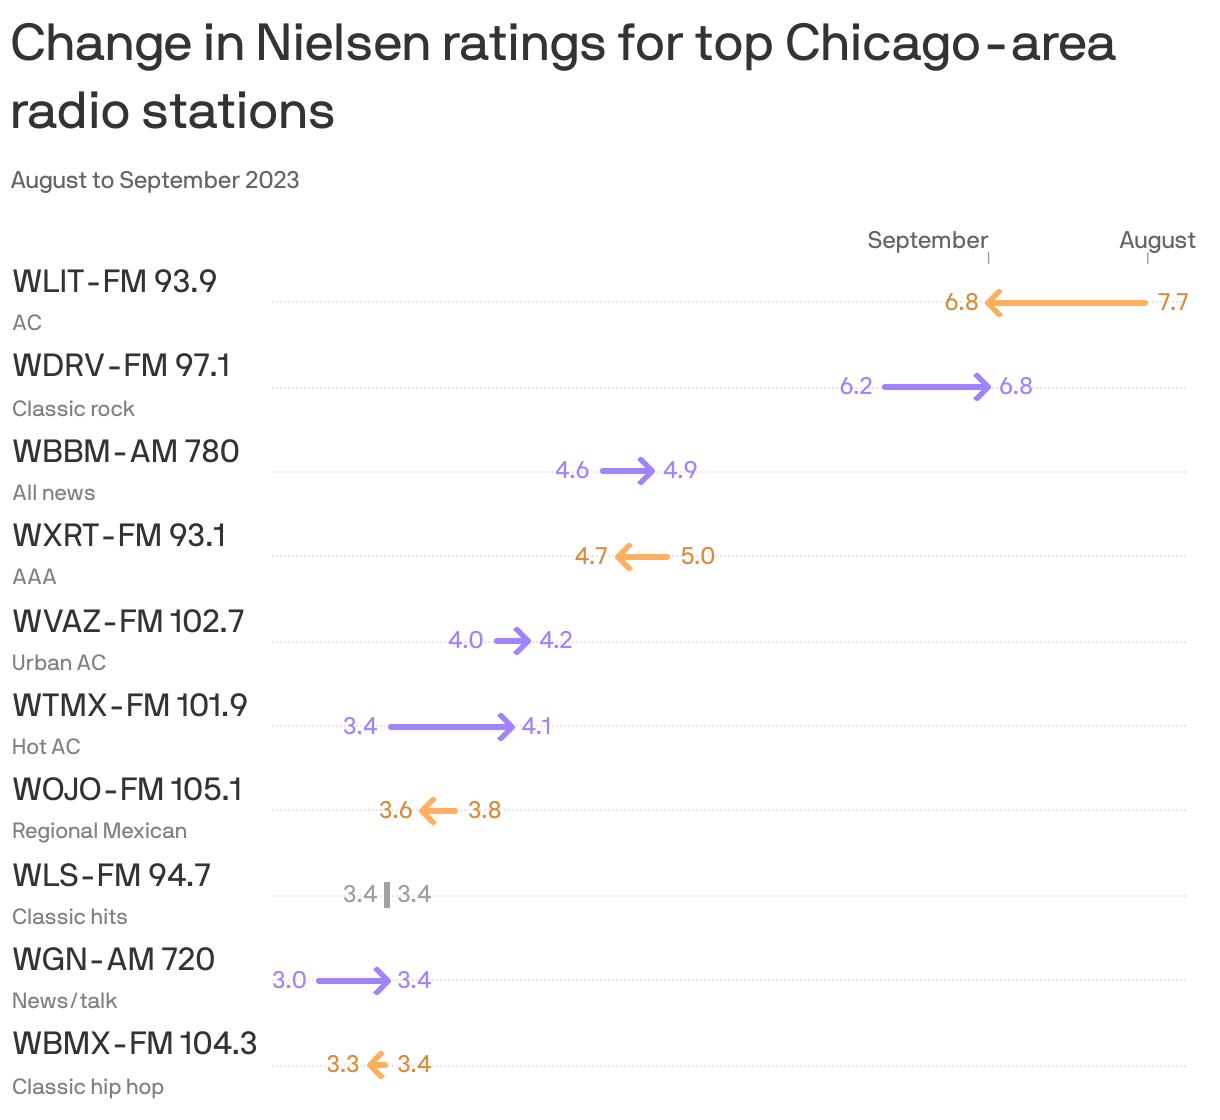 Change in Nielsen ratings for top Chicago-area radio stations